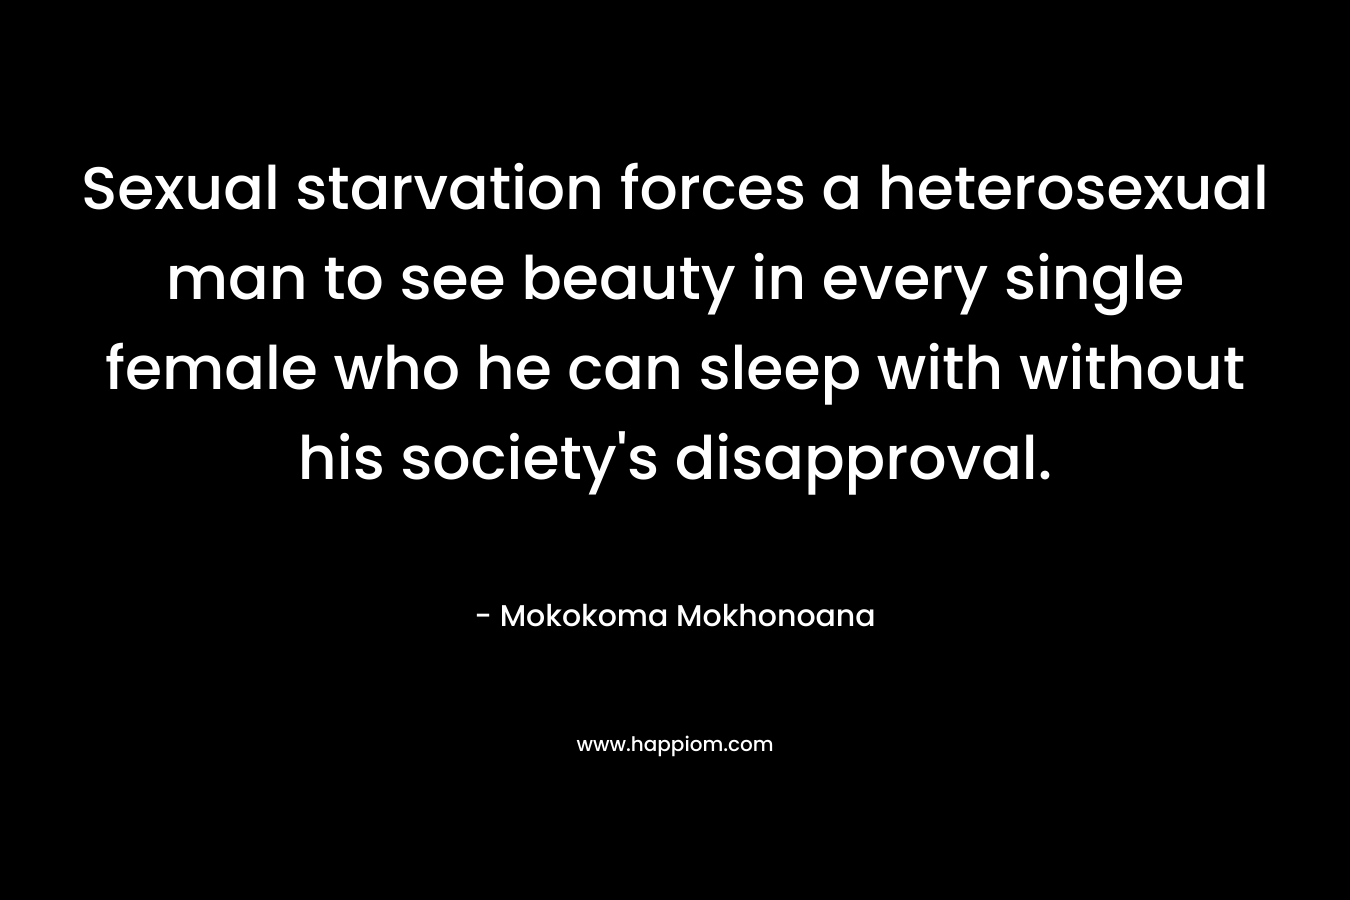 Sexual starvation forces a heterosexual man to see beauty in every single female who he can sleep with without his society’s disapproval. – Mokokoma Mokhonoana